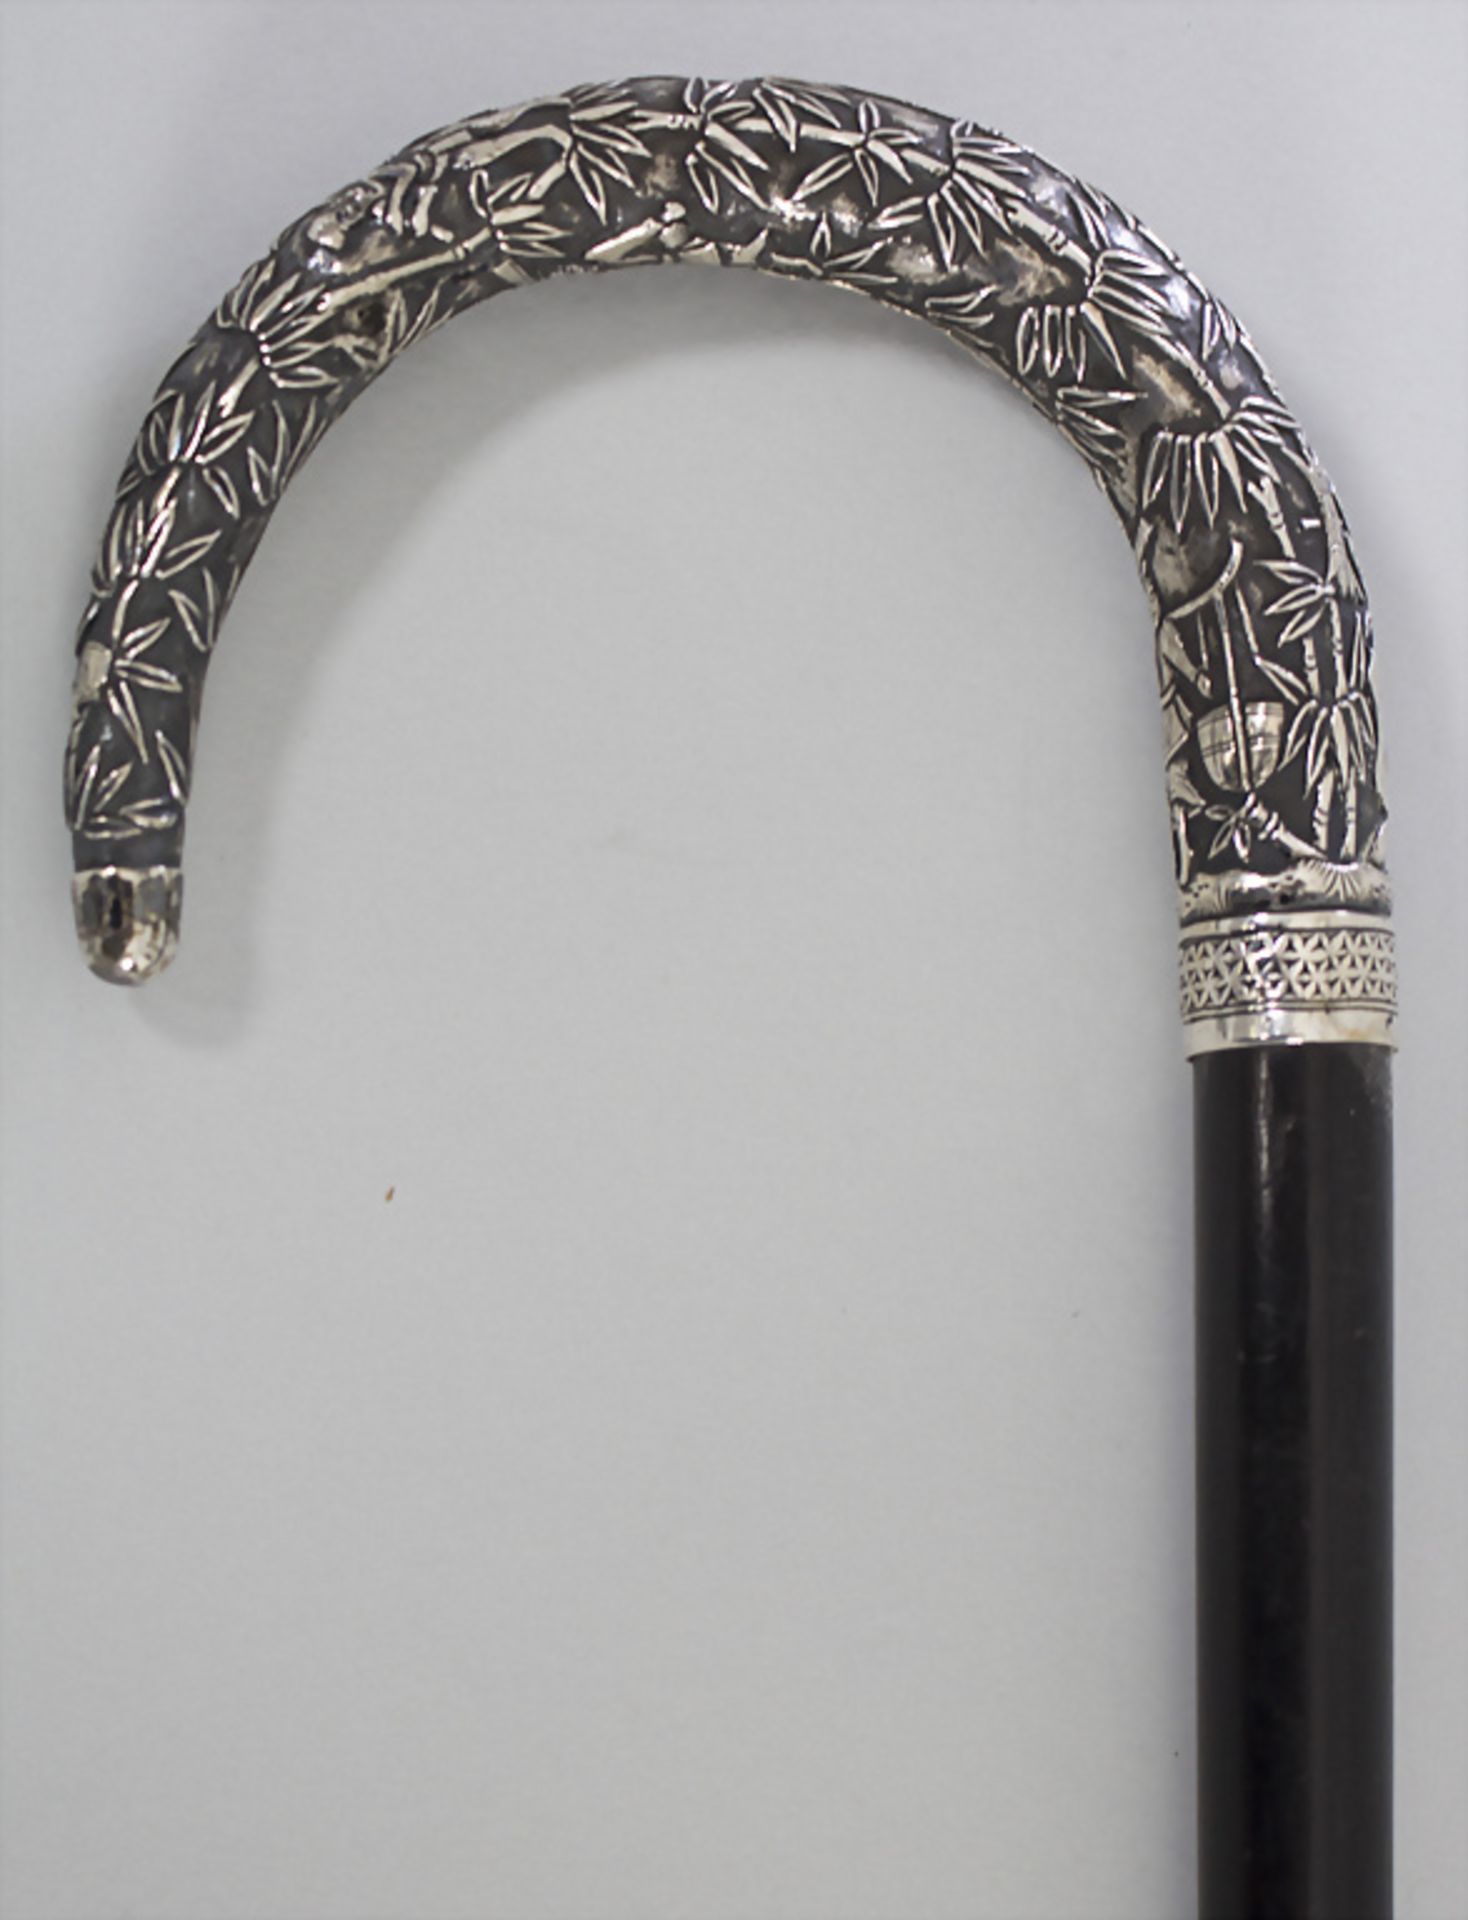 Spazierstock mit Silbergriff / A walking stick / cane with silver handle, China, um 1900